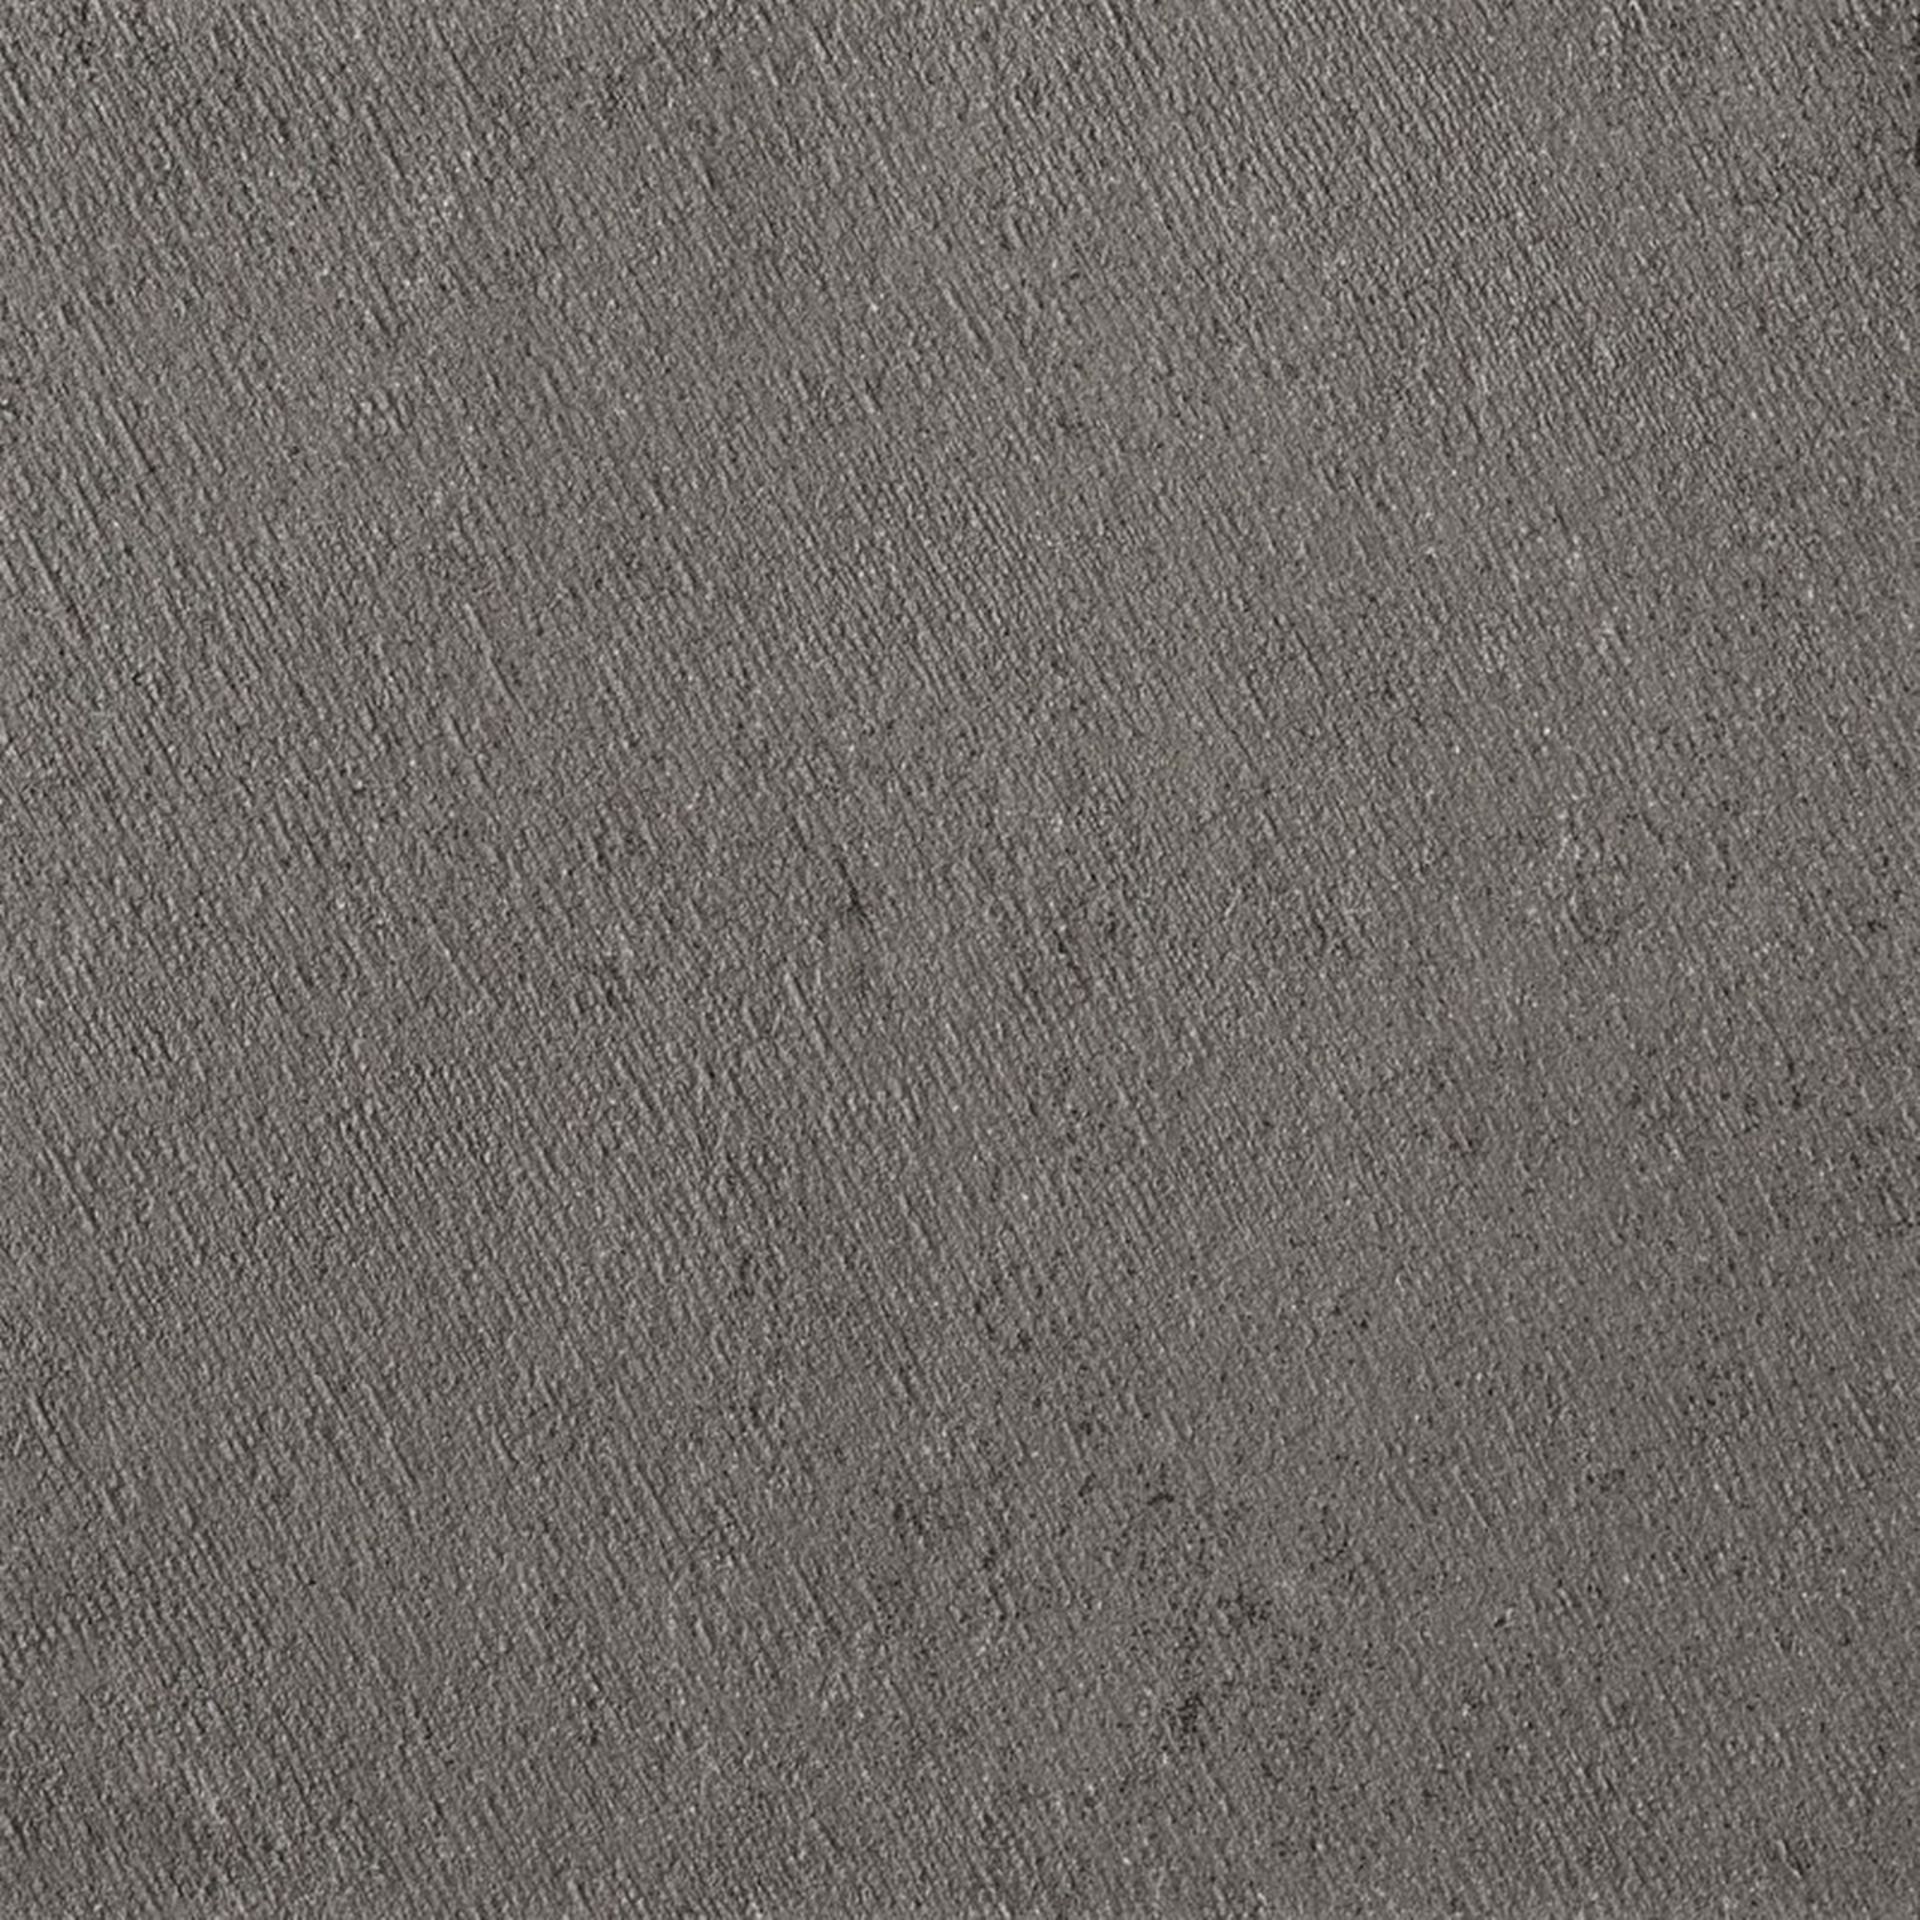 MIXED LOT - 3 ITEMS - #1. 12"X24" STONE EFFECT BASALTINA COLOUR BODY PORCELAIN TEXTURED TILE MADE IN - Image 3 of 6